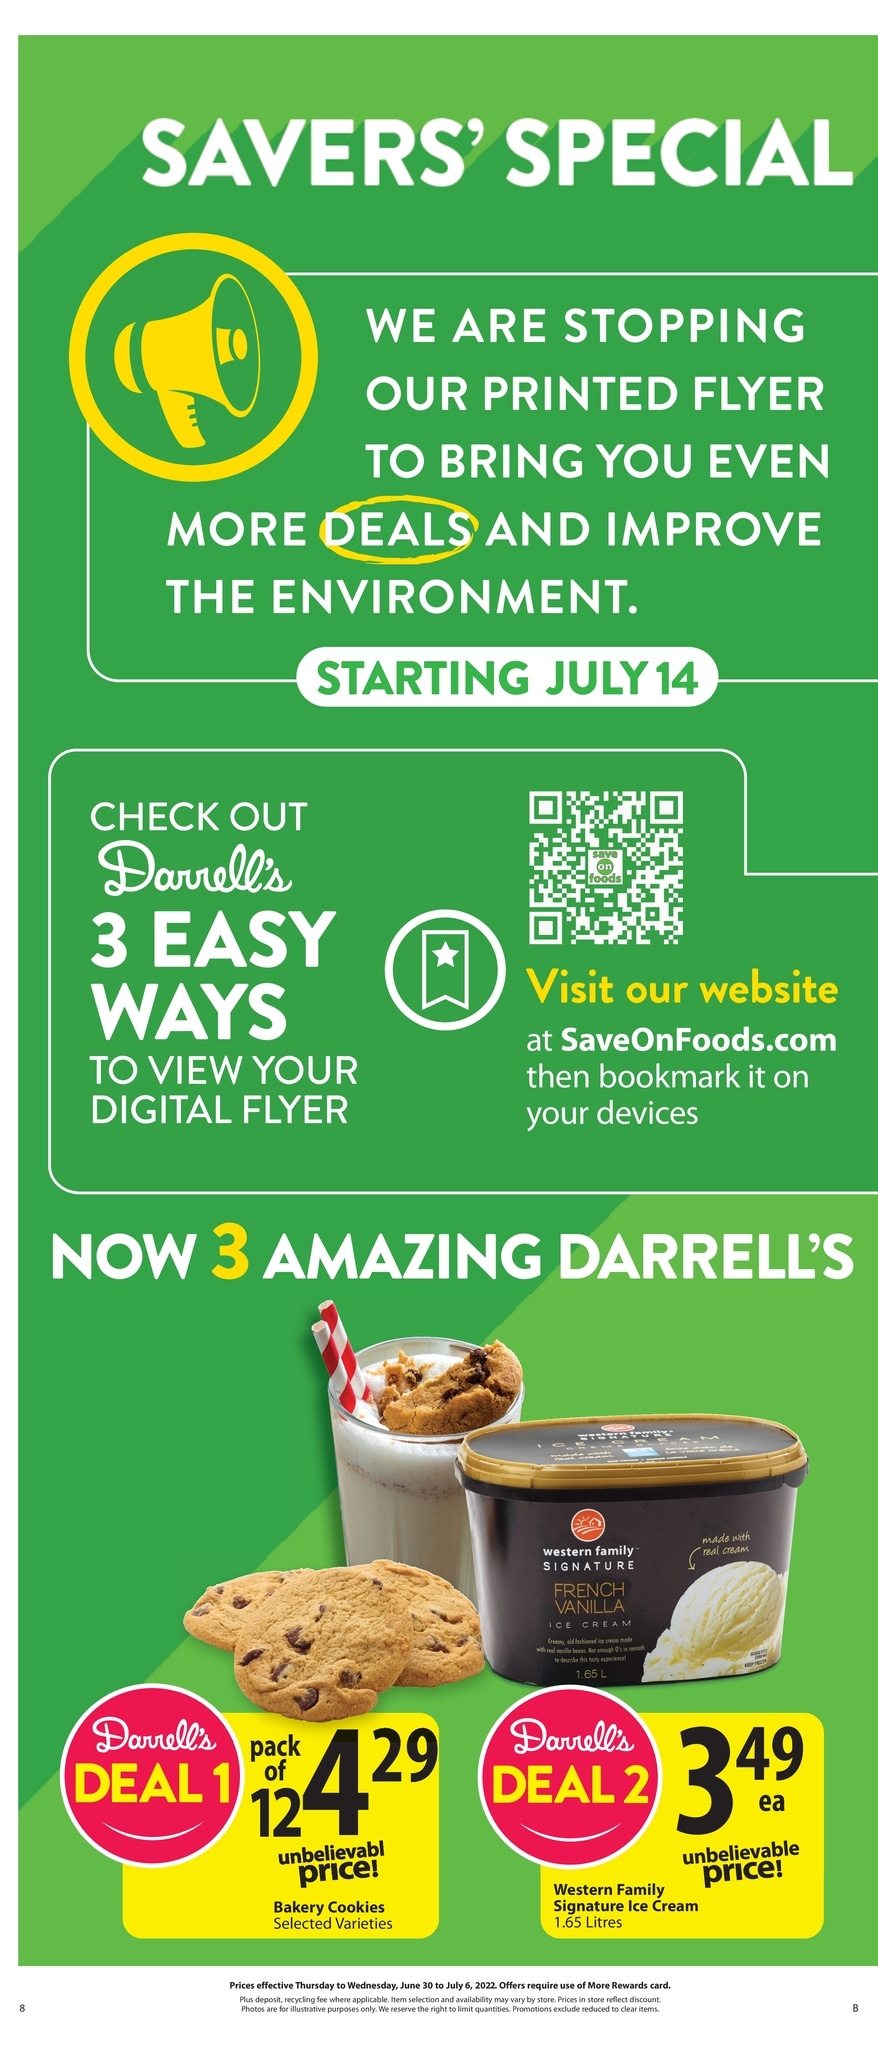 Save-On-Foods - Weekly Flyer Specials - Page 8